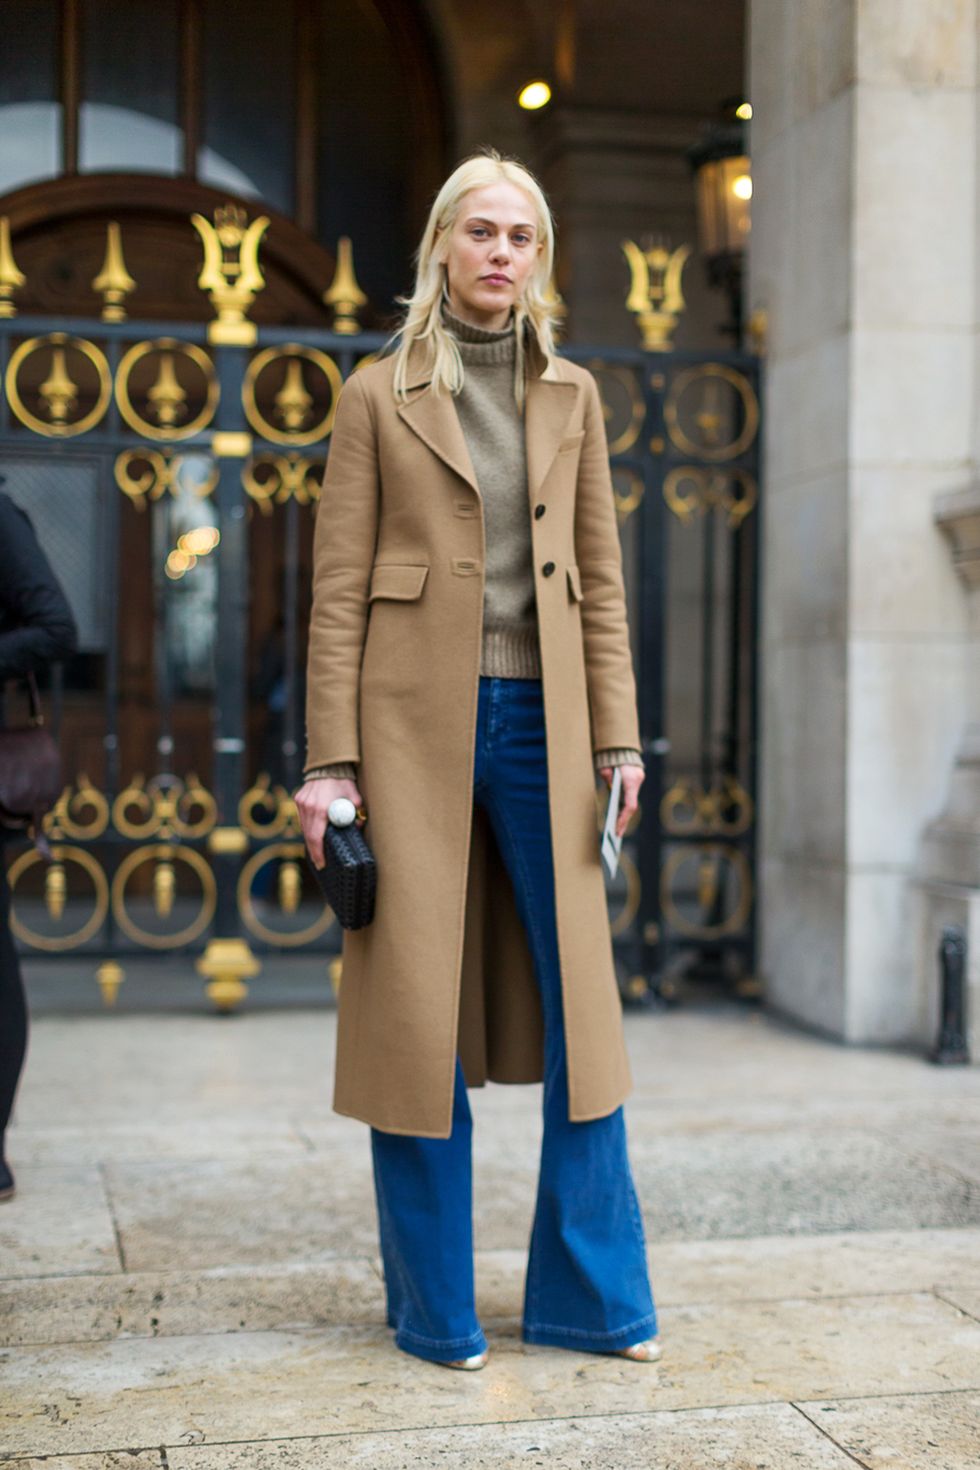 This Casual Chic Outfit is Our Winter Go-To